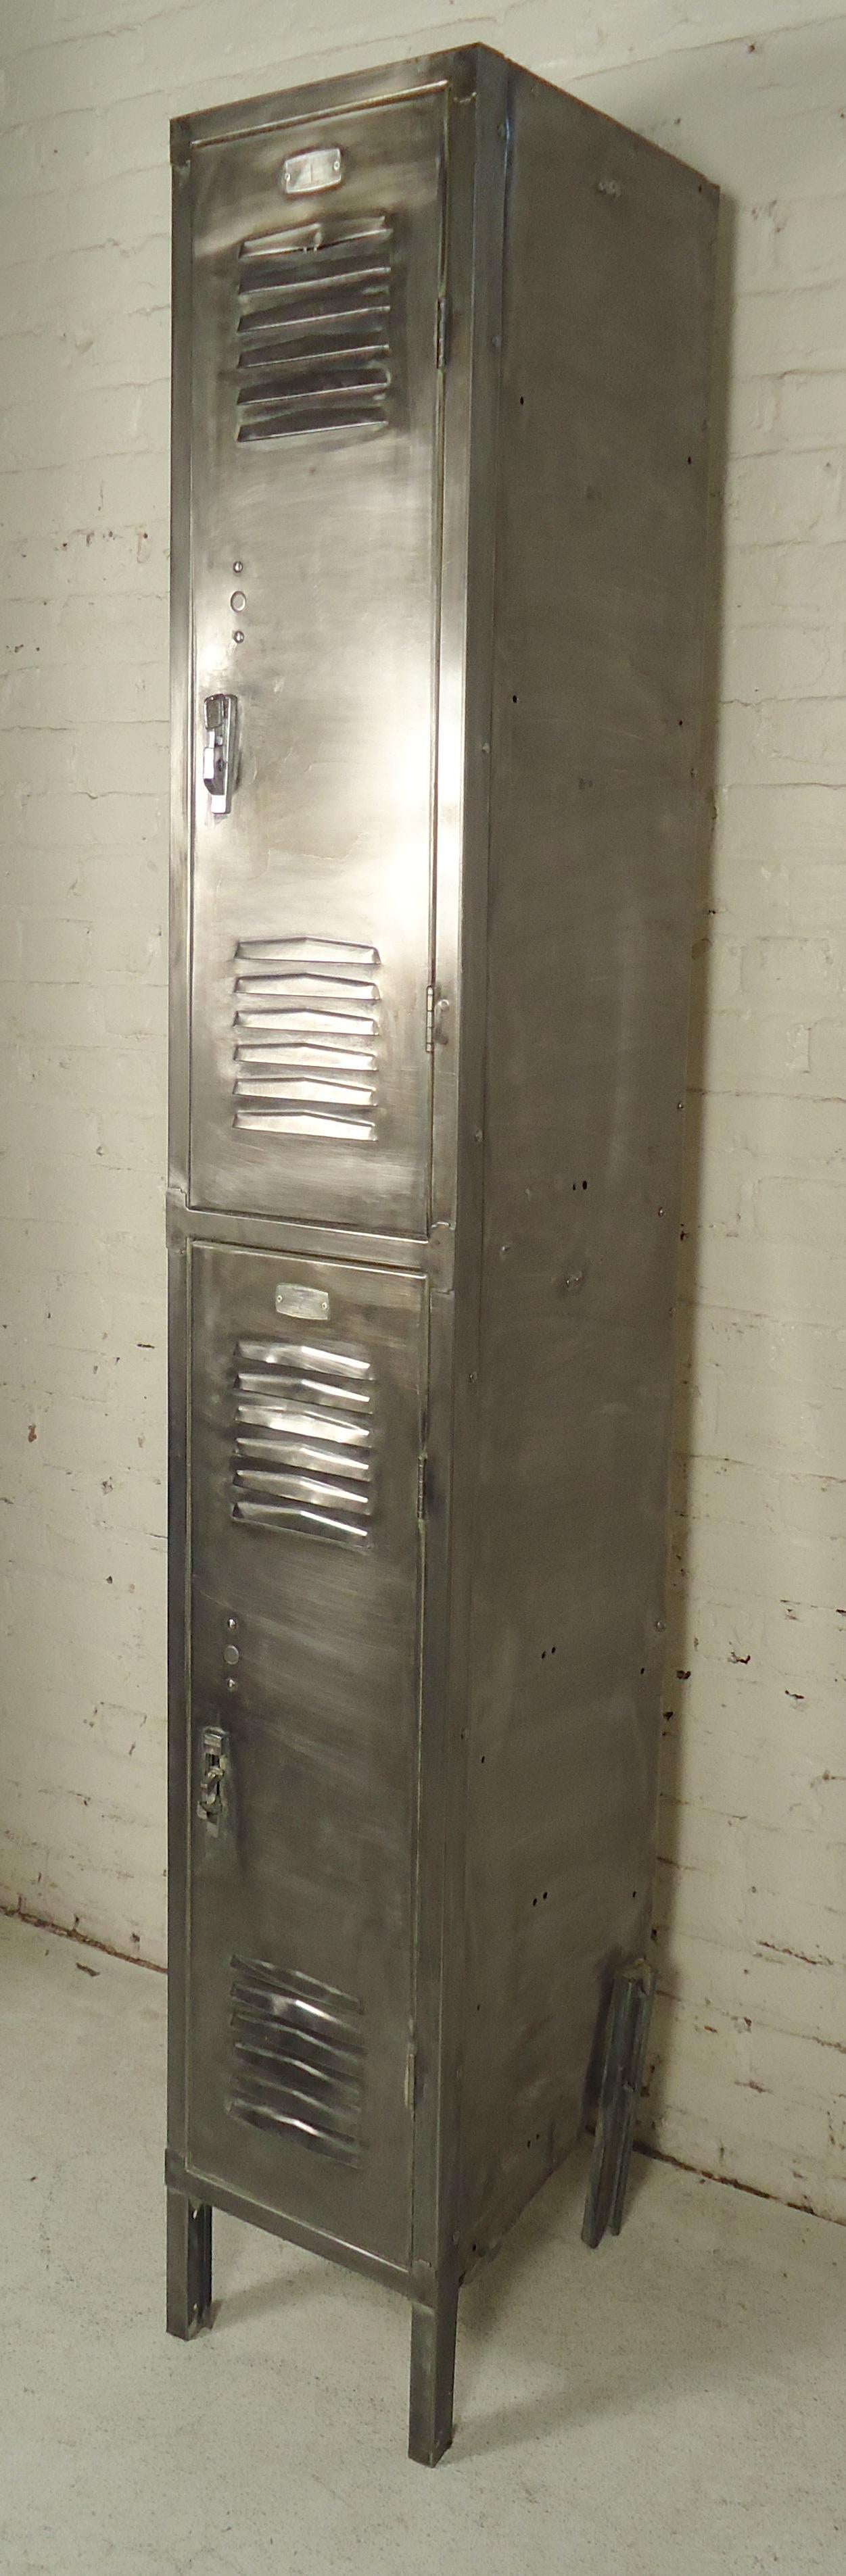 Industrial metal locker unit refinished in a bare metal style finish. Two cabinets with locking handles.

(Please confirm item location - NY or NJ - with dealer).
 